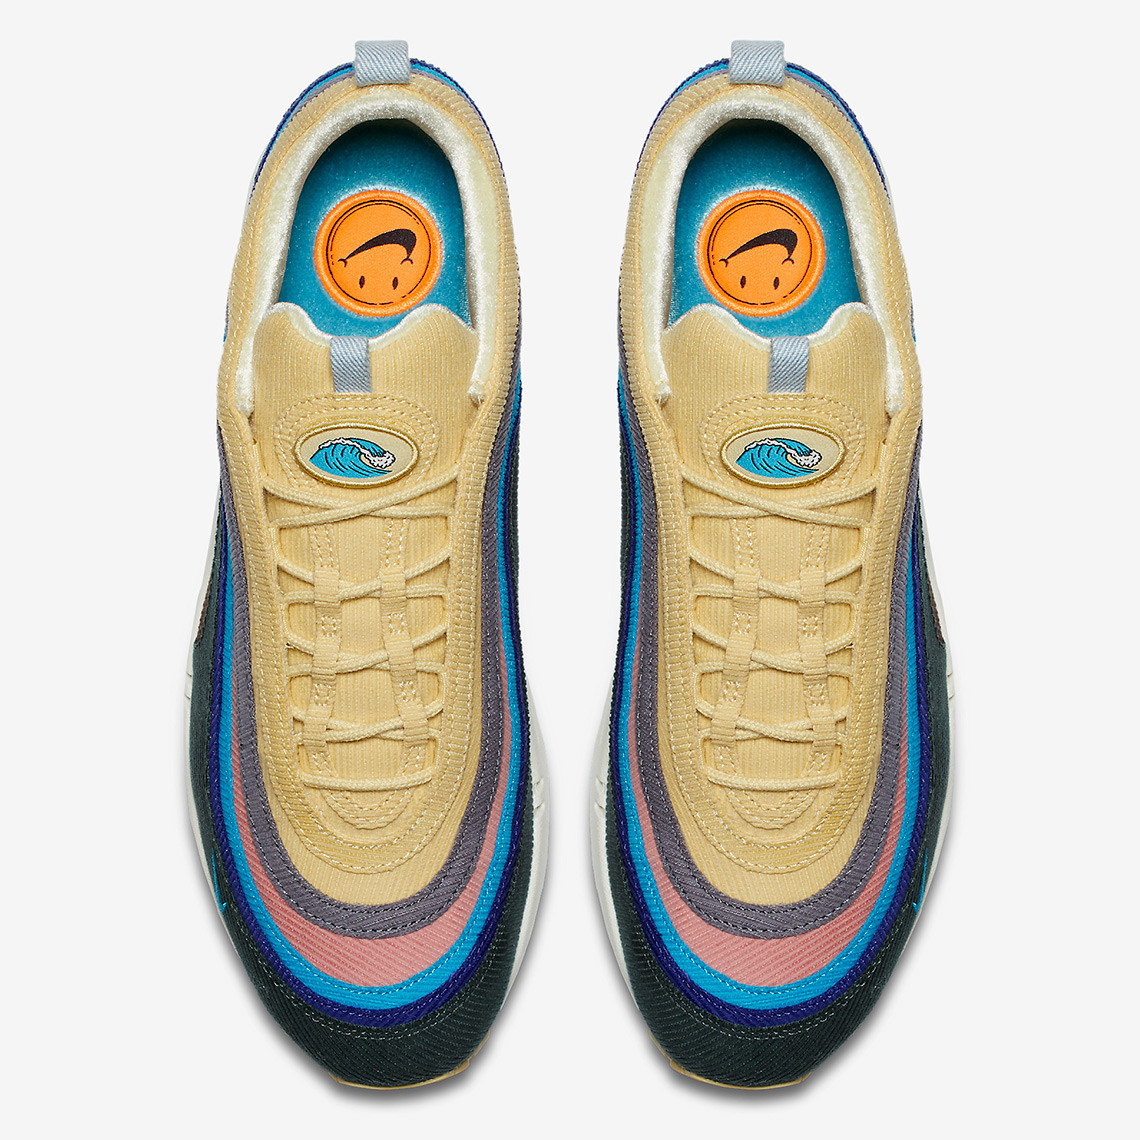 salami Hueco límite The Super-Retro Sean Wotherspoon X Nike Air Max 97/1 Drops On Air Max Day  The Super-Retro Sean Wotherspoon X Nike Air Max 97/1 Drops On Air Max Day